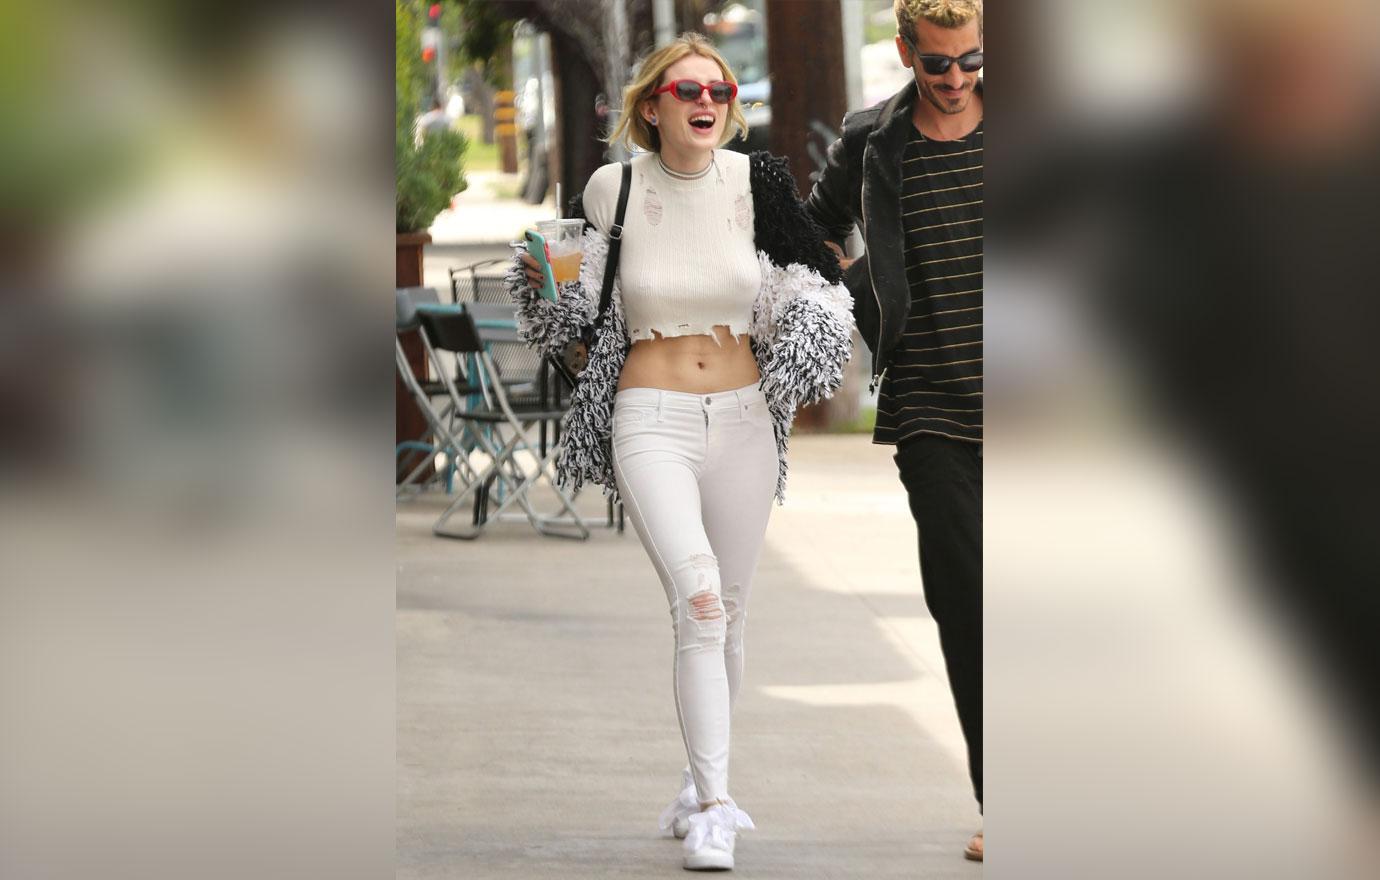 PICS] Free The Nipple! Bella Thorne Proves She Isn't About That